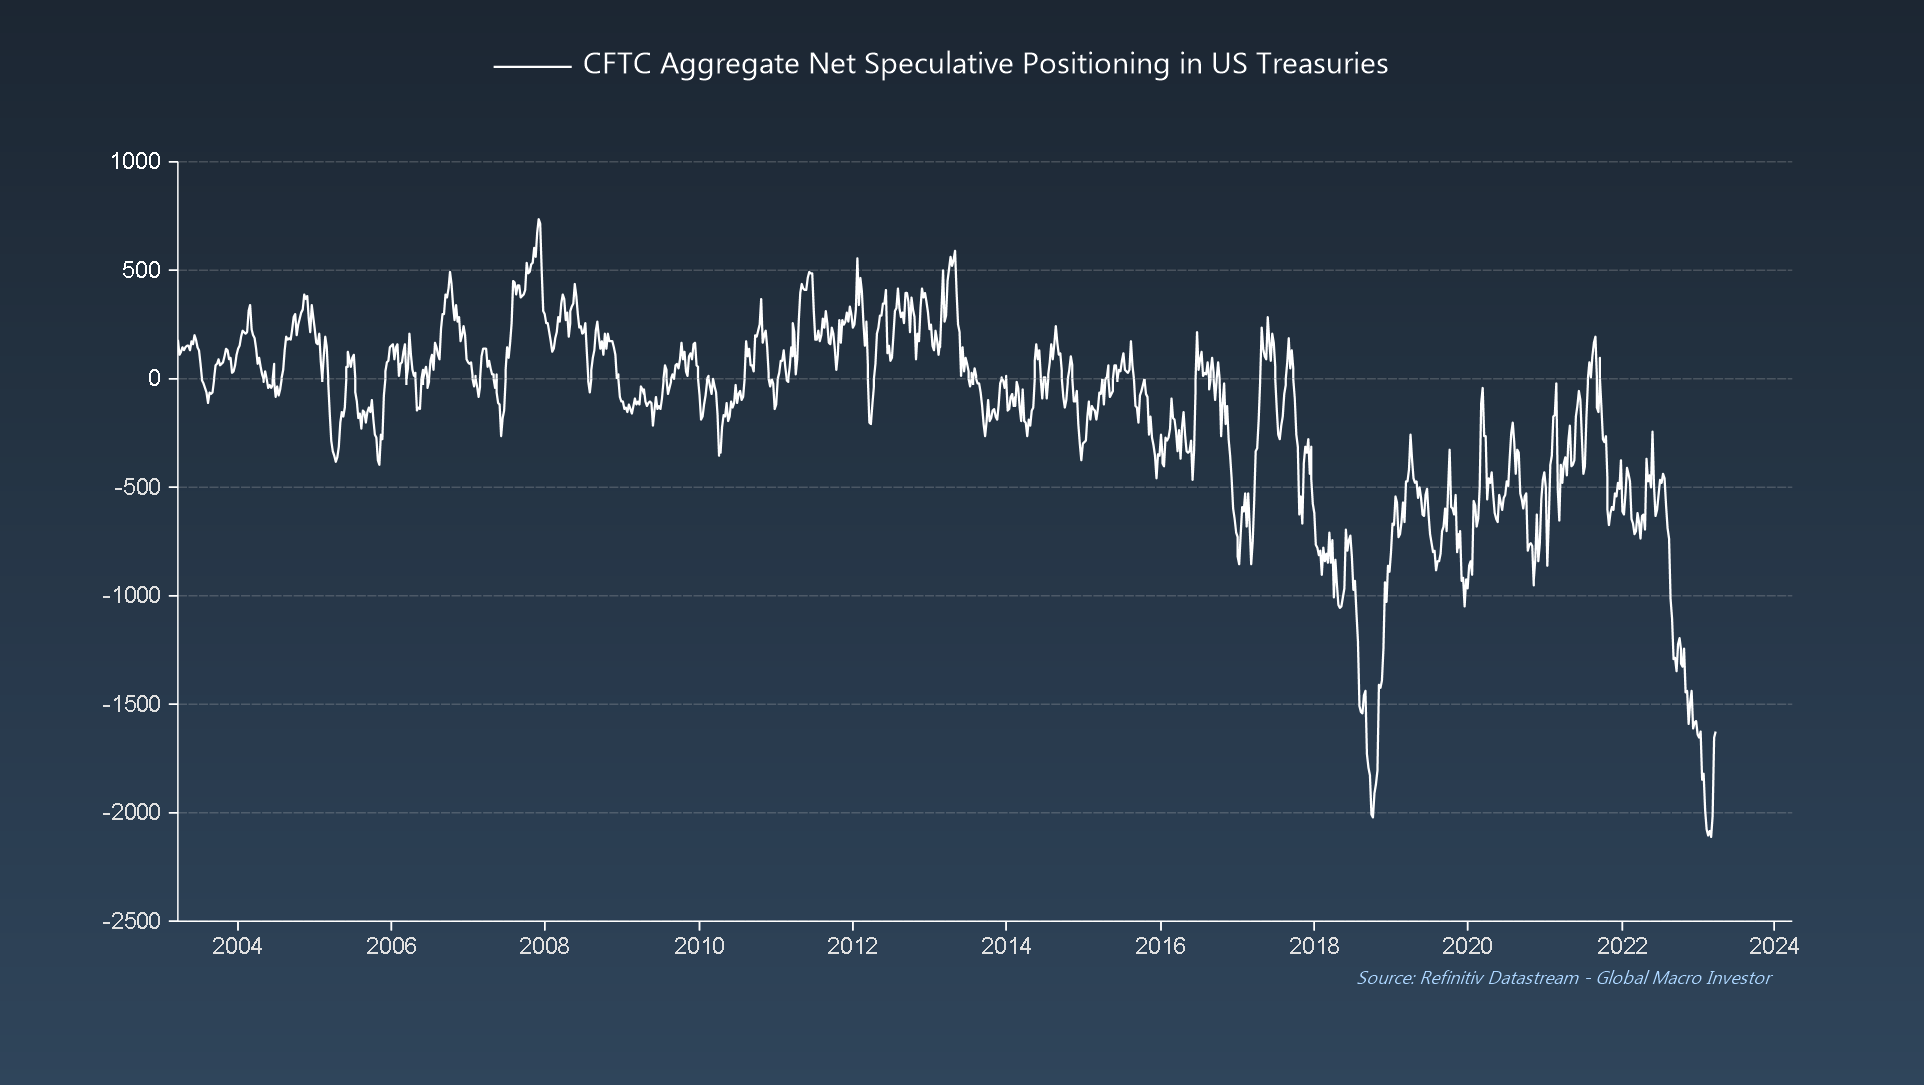 CFTC Aggregate Net Speculative Positioning in US Treasuries